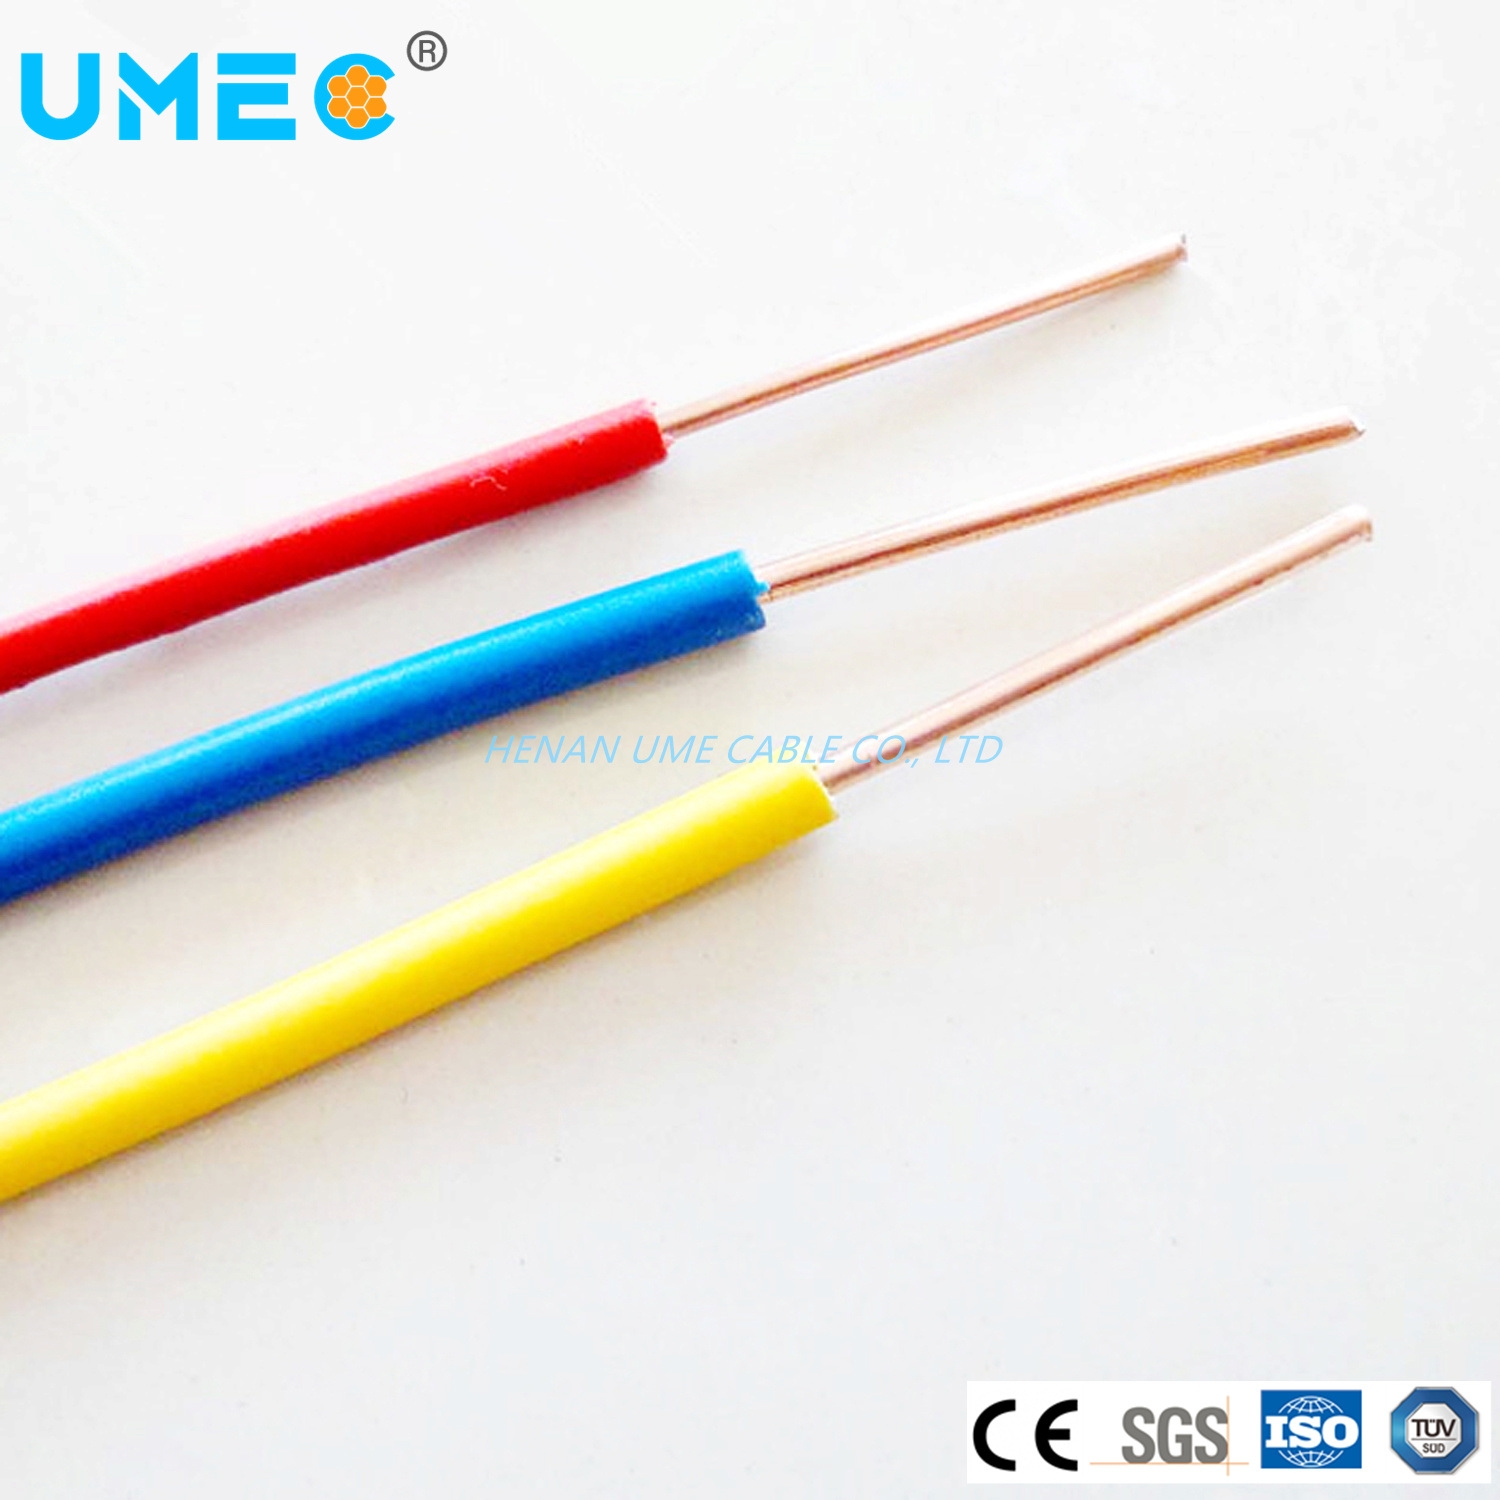 Electrical Cable Laid in Conduit Nya Nyaf H07V-K H07V-R H07V-U BV Solid Stranded 1.5mm² -400mm² PVC Electric Cable